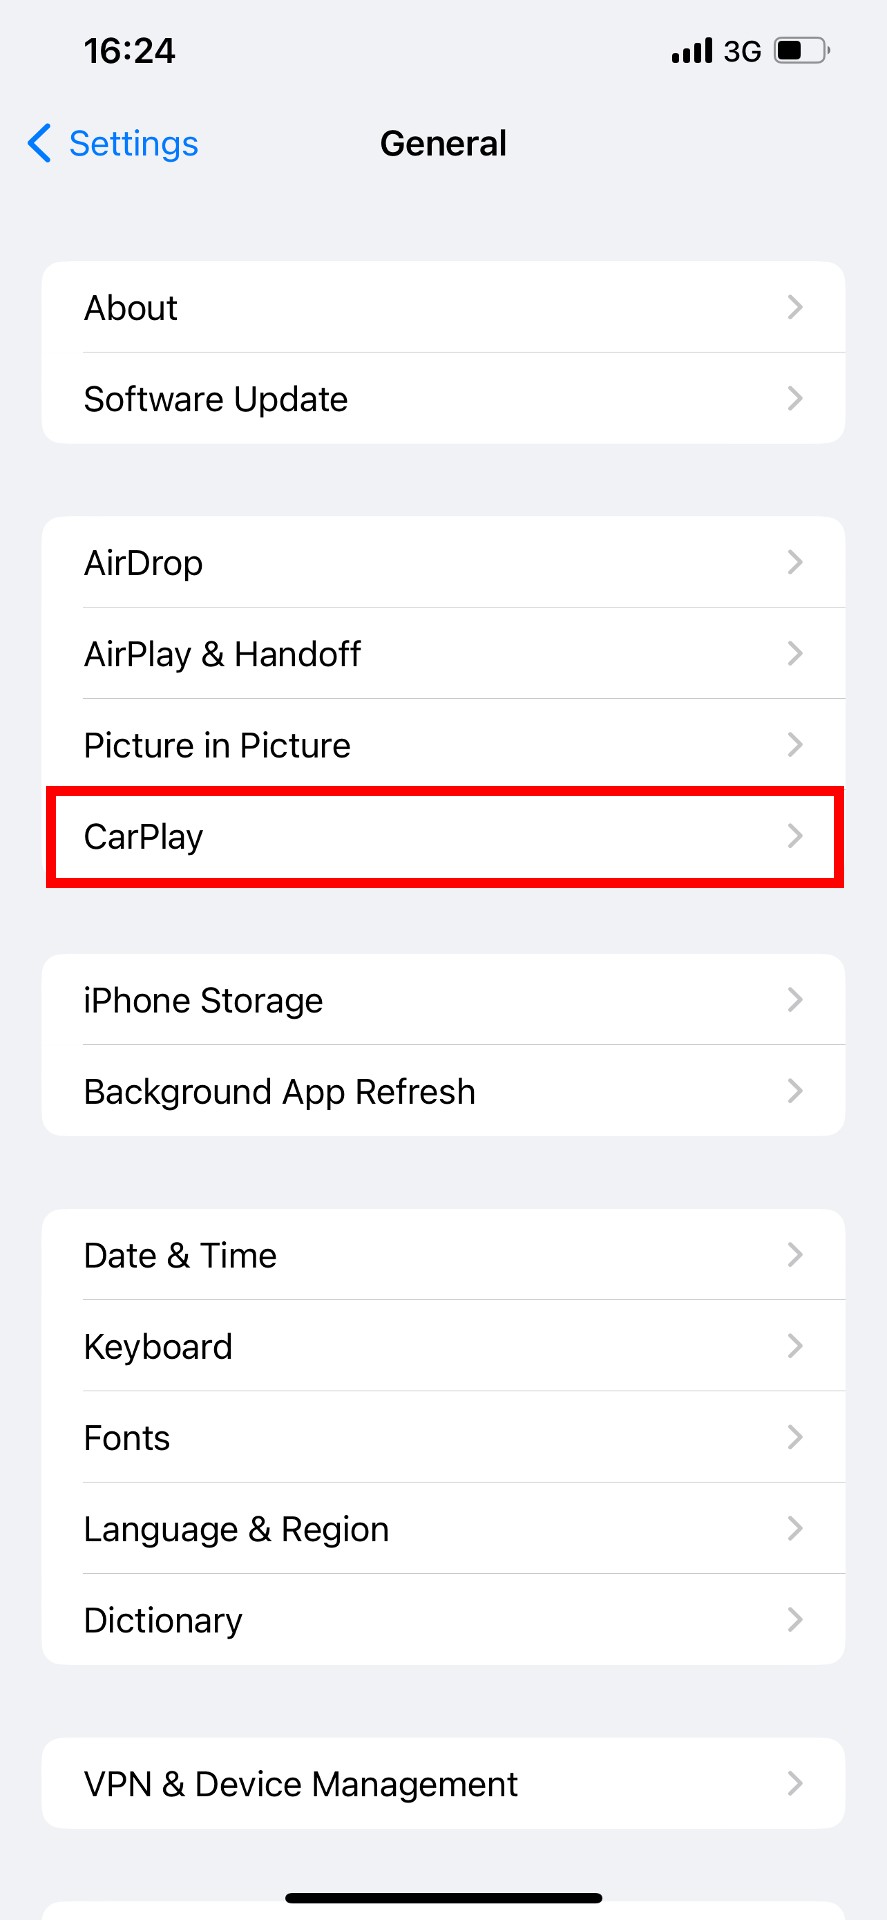 iOS general settings with "CarPlay" highlighted